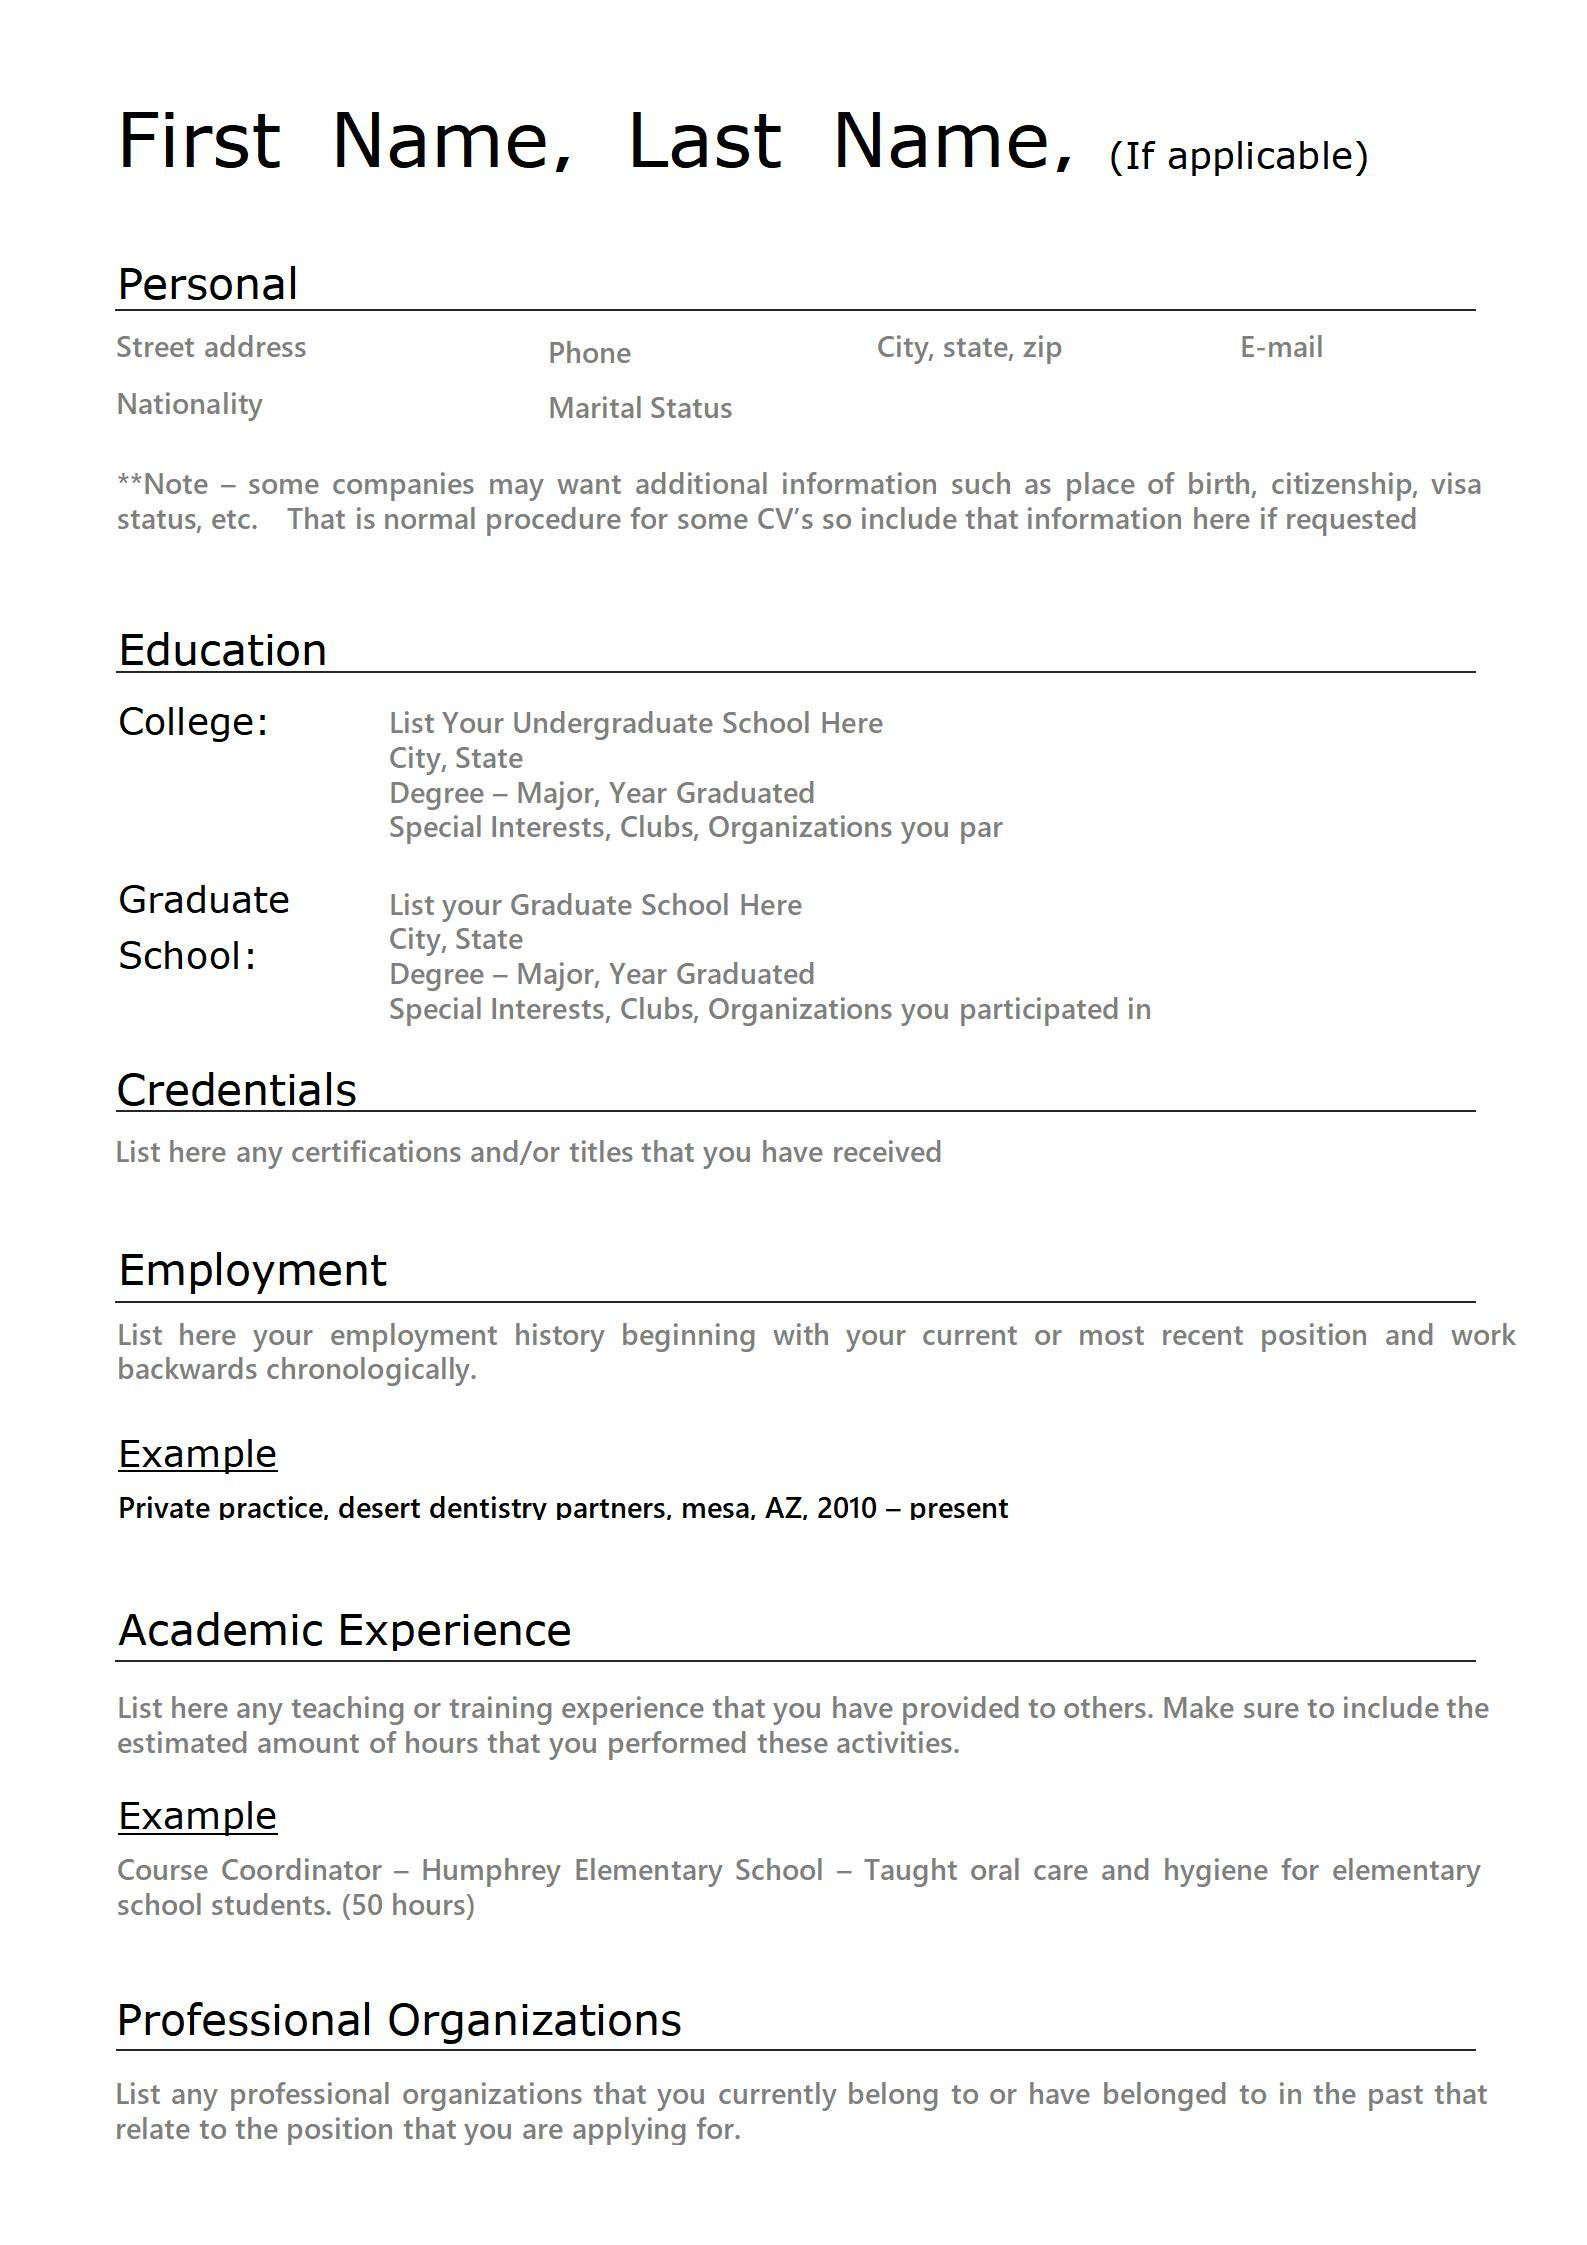 High School Student with One Job Resume Sample First-time Resume with No Experience Samples Wps Office Academy